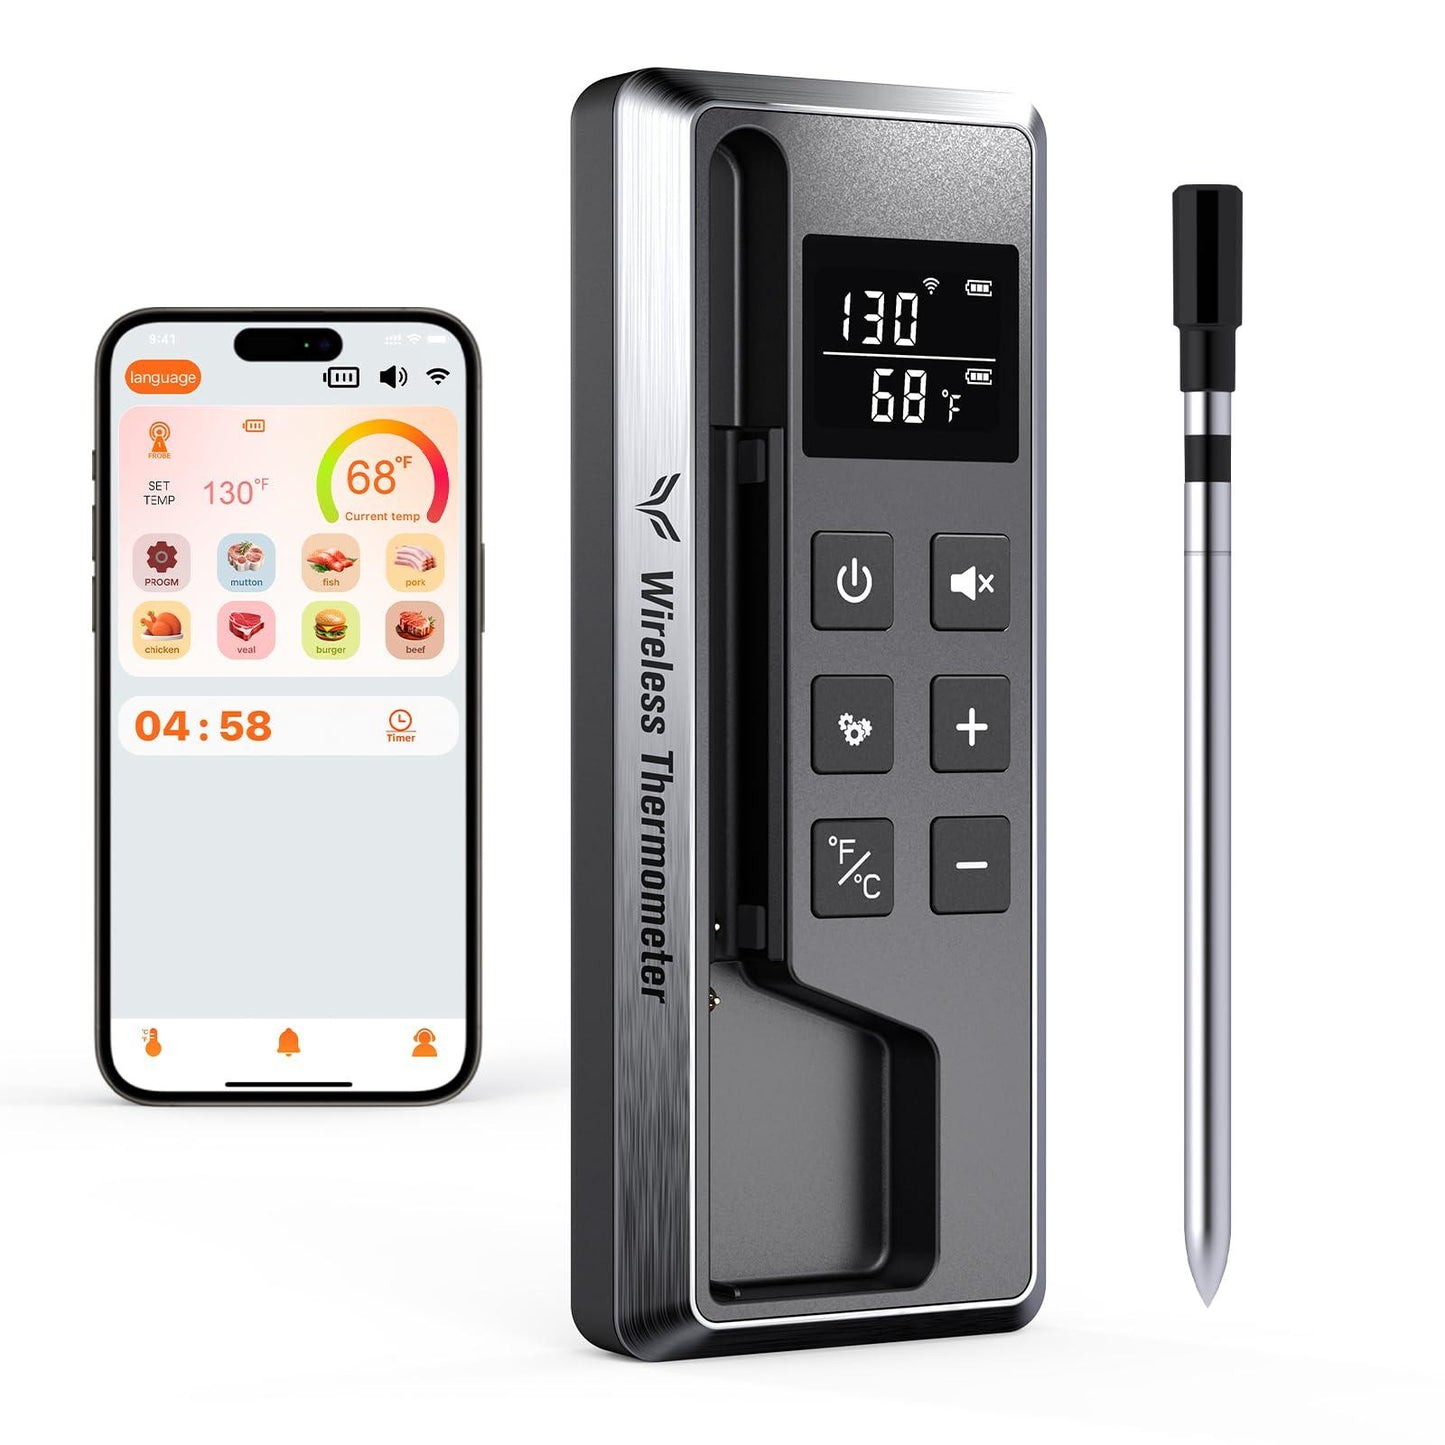 Paneceia Wireless Meat Thermometer Digital, 800FT Long Range Bluetooth Cooking Thermometer, Food Thermometer for Remote Monitoring of Grill, Oven, Smoker, Air Fryer, Rotisserie, iOS & Android App - CookCave